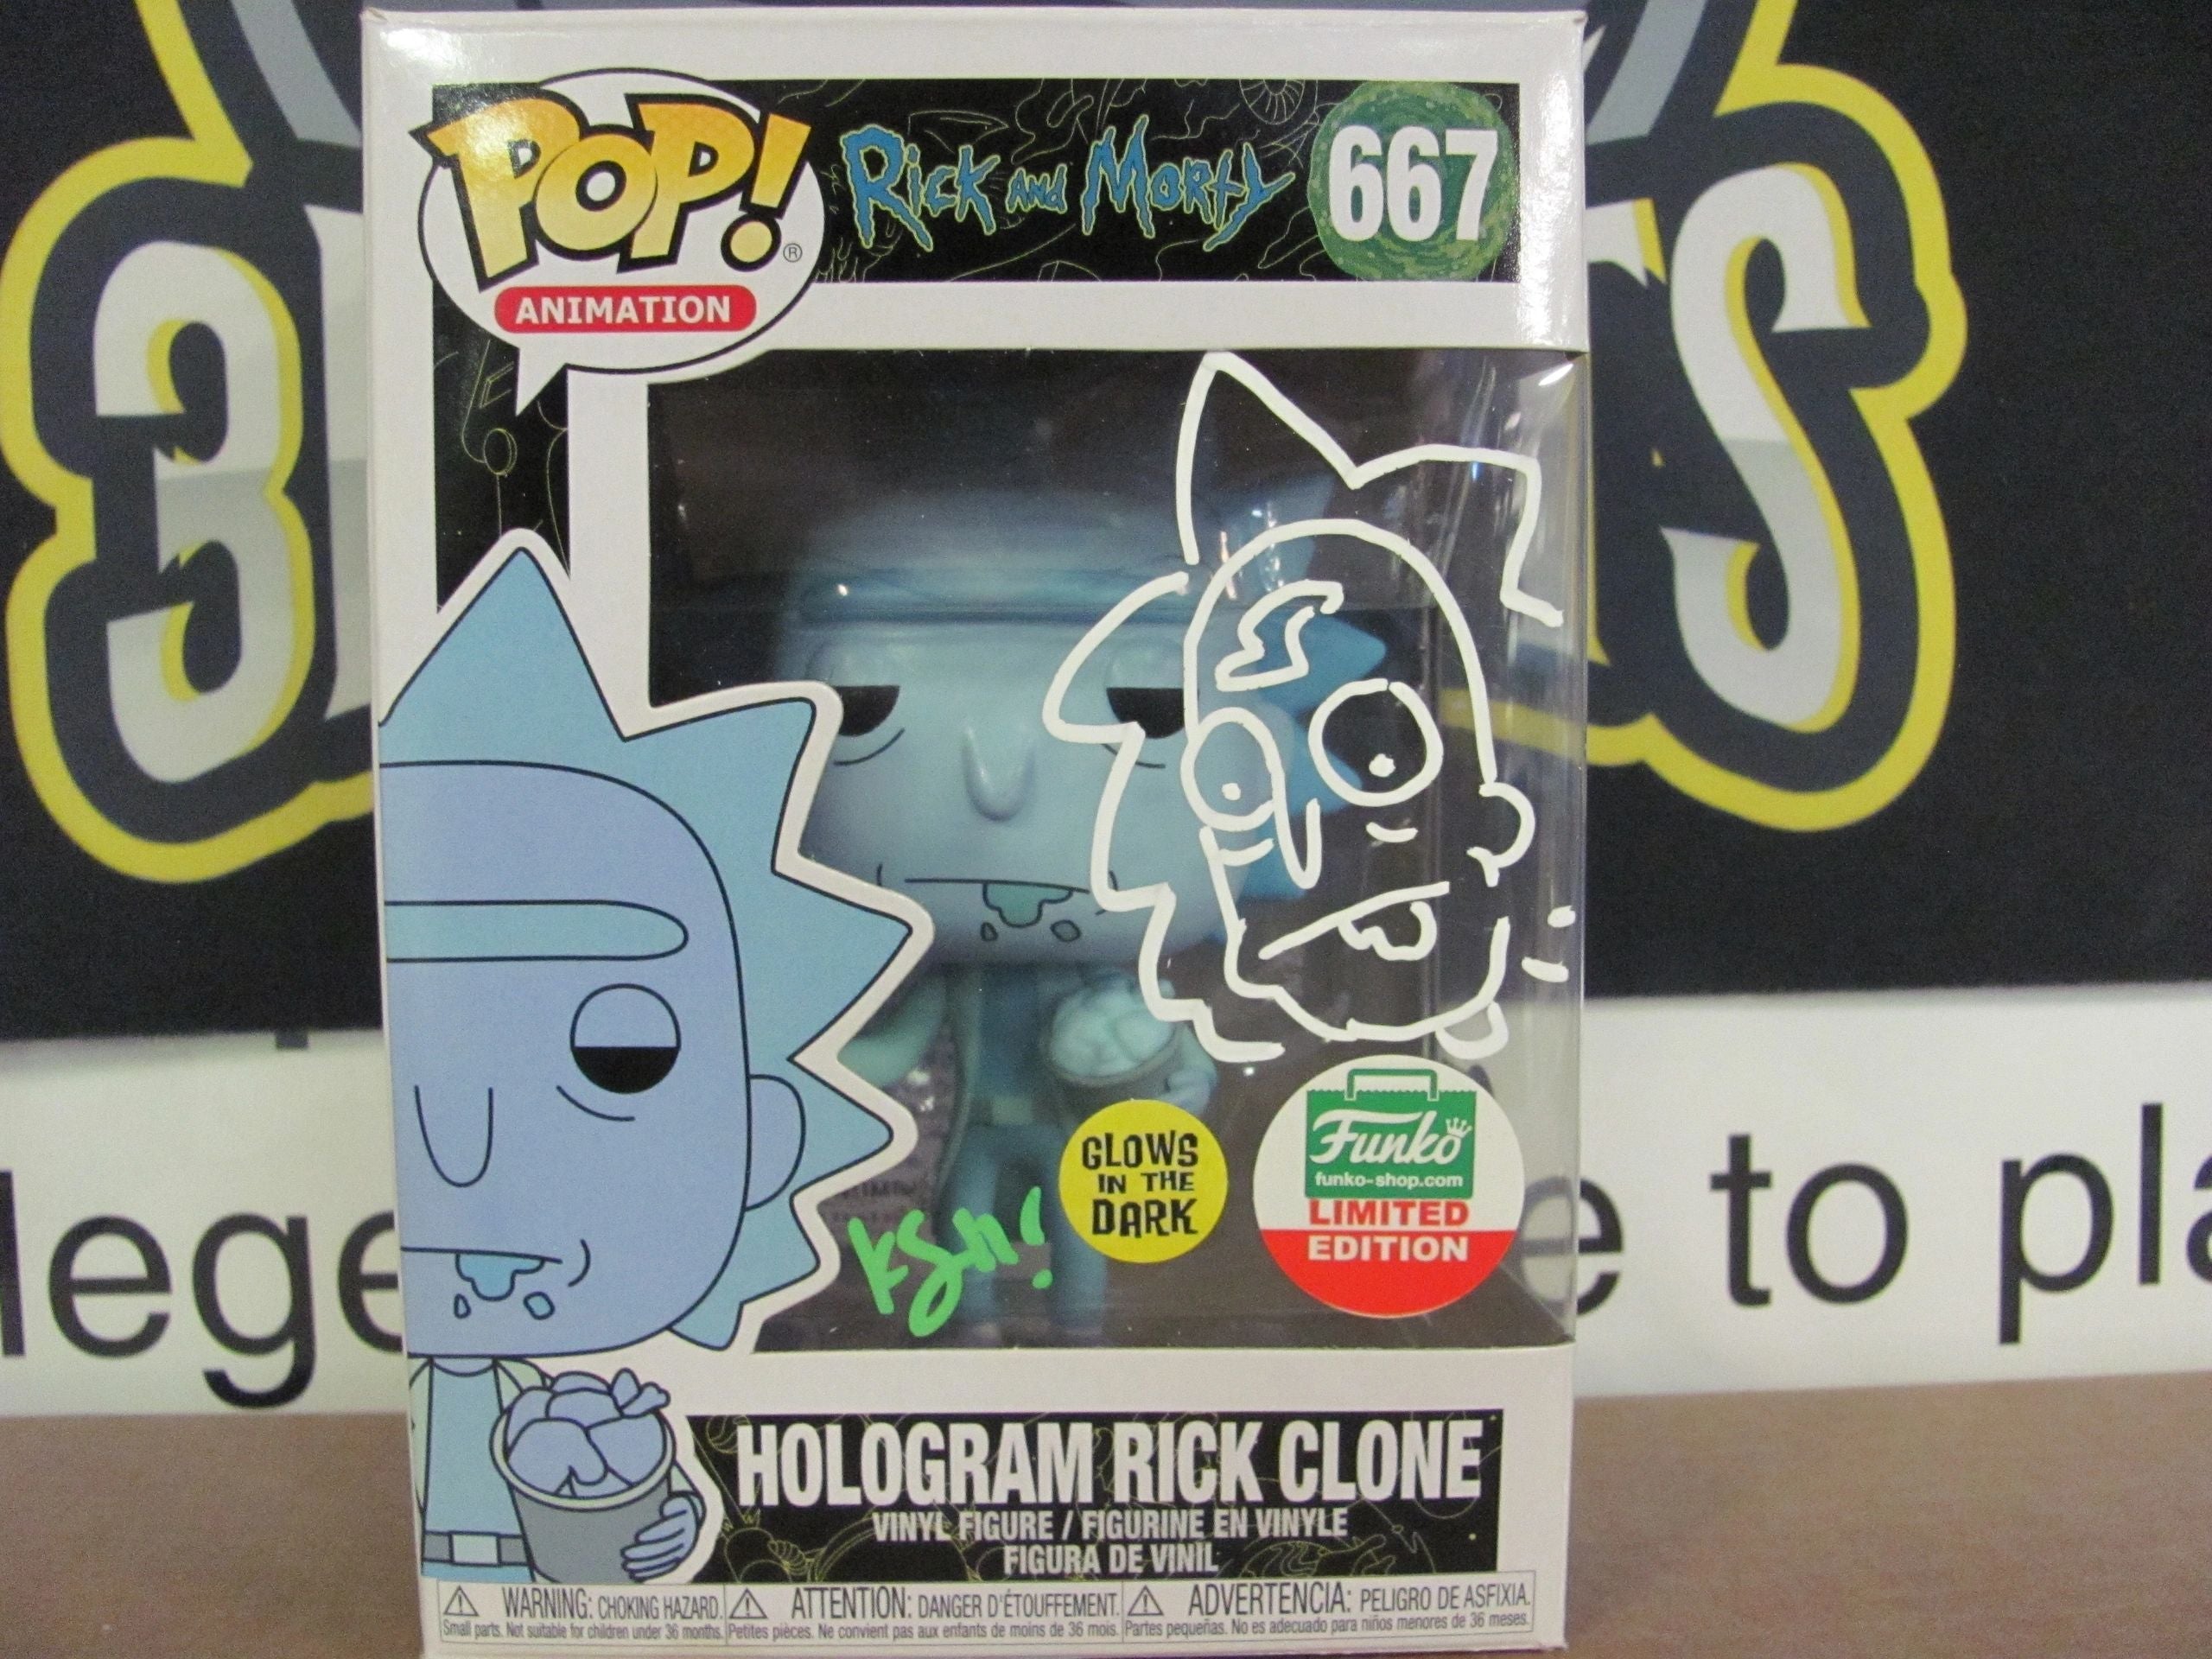 Kyle Starks Signed Funko Pop Rick And Morty Hologram Rick Clone #667 Funko Shop Exclusive w/ cover & Beckett COA